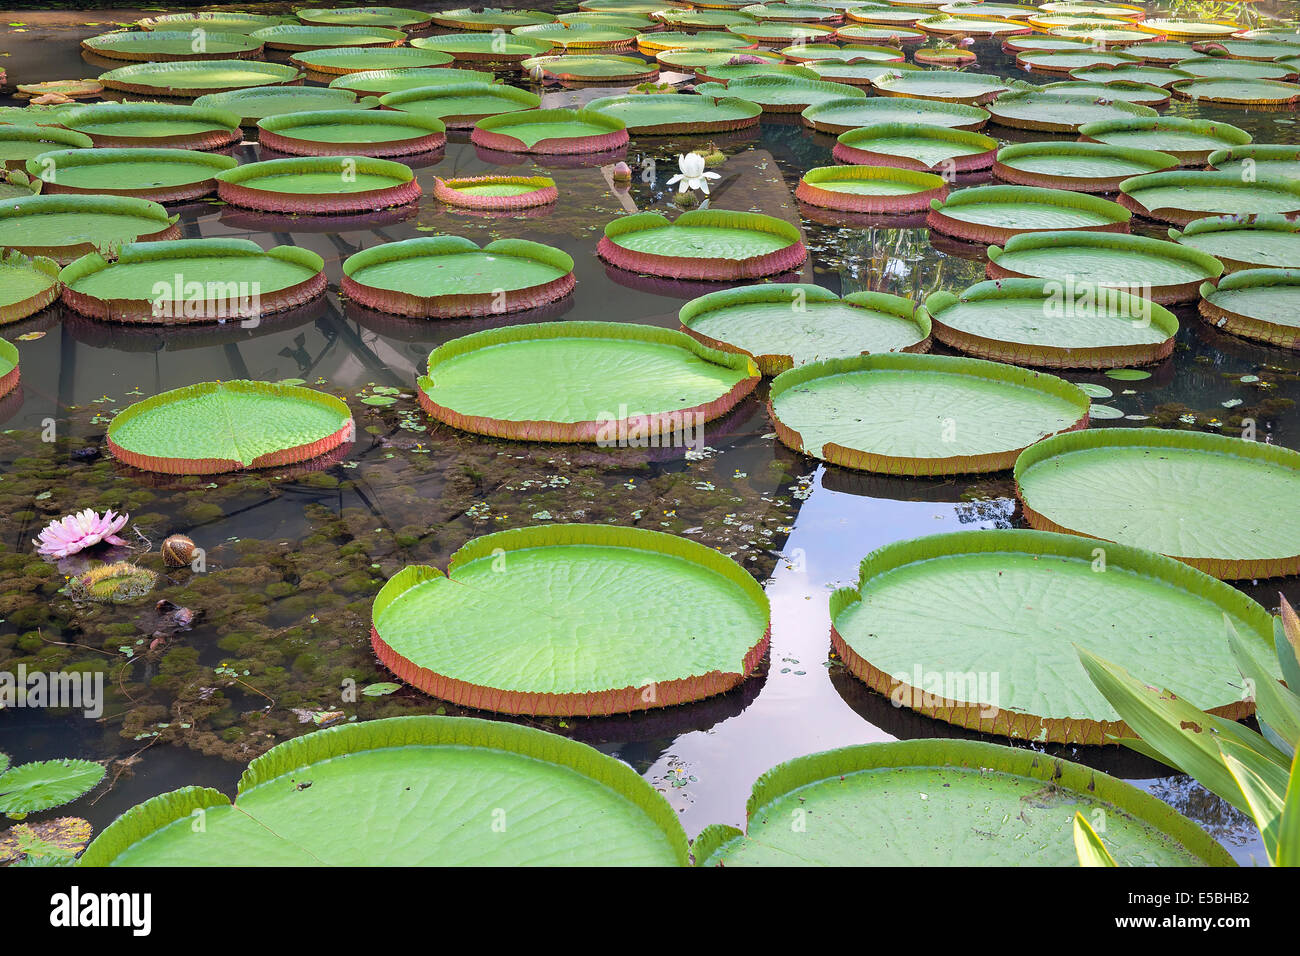 Giant Amazonian Water Lily Pads Floating in Lake with Blooming Flowers Stock Photo